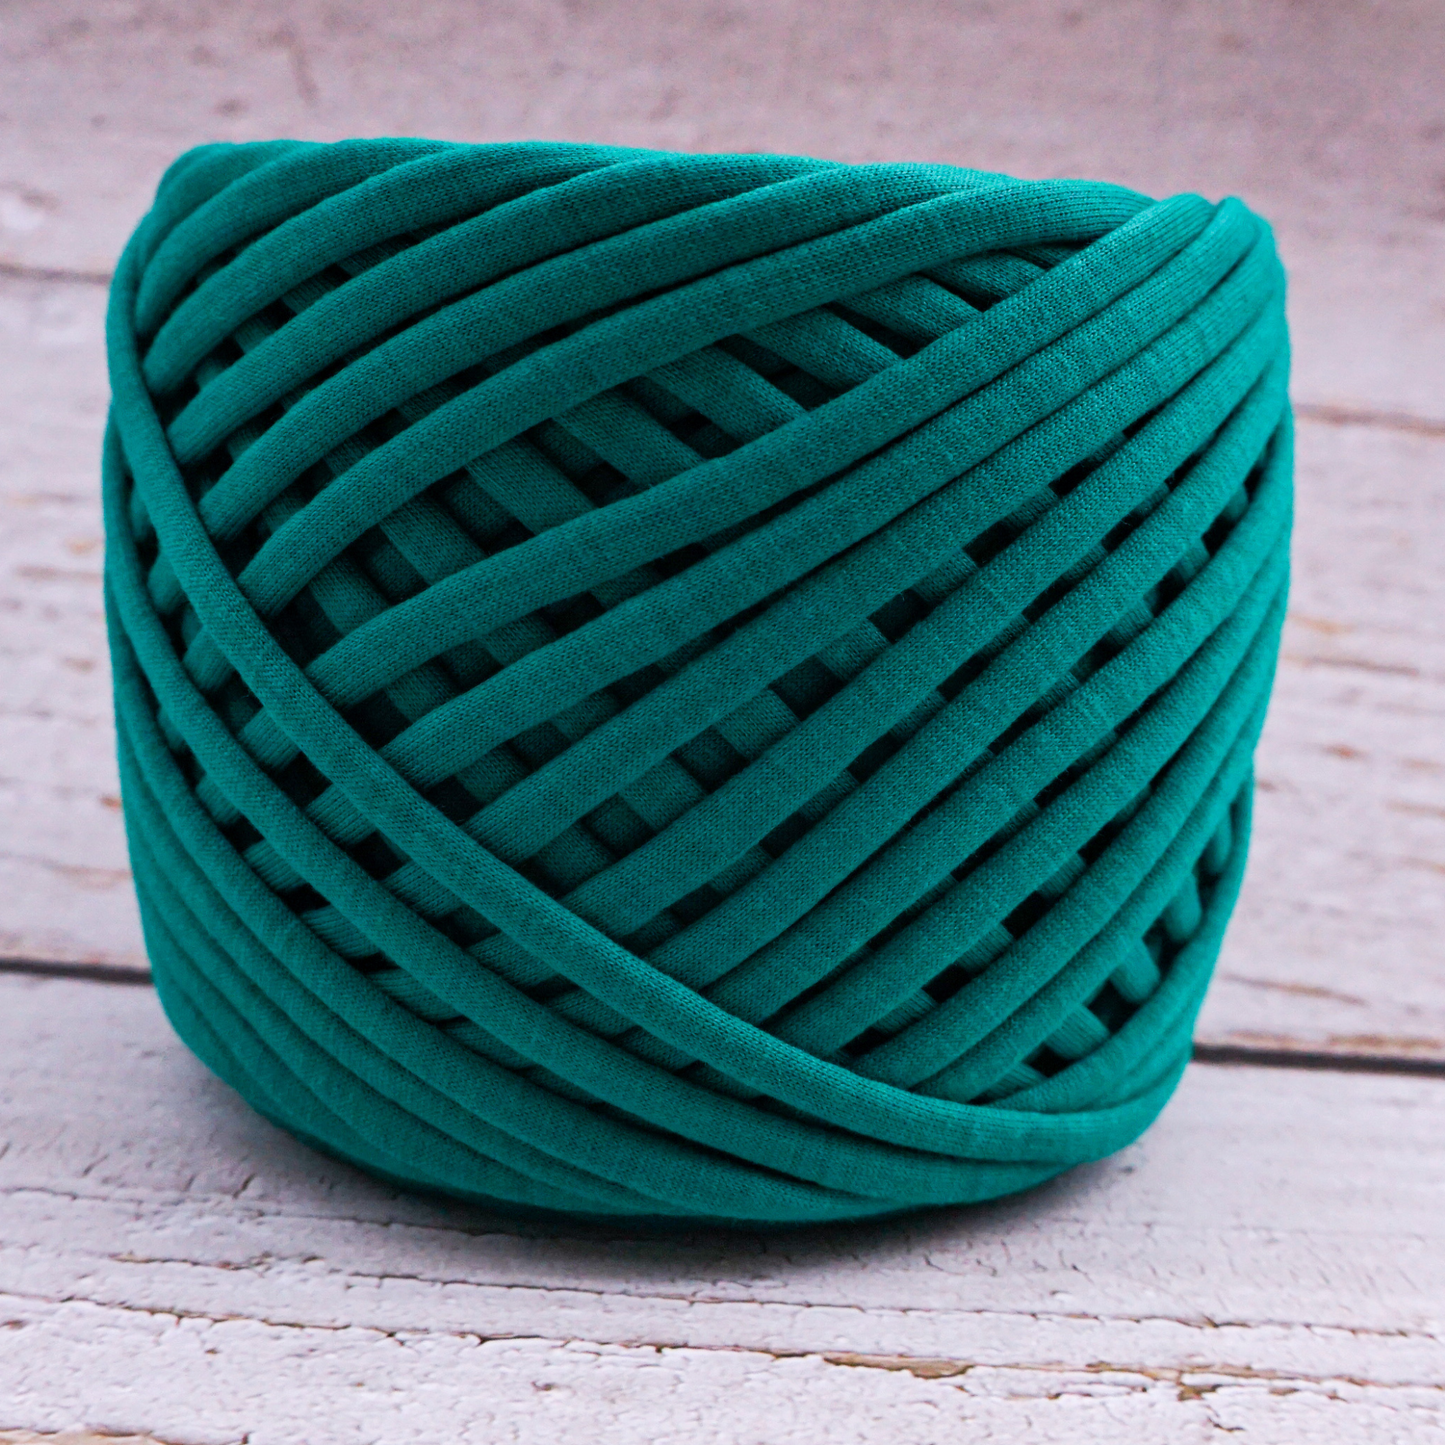 T-shirt yarn for crocheting baskets, bags, rugs and home decor. Green